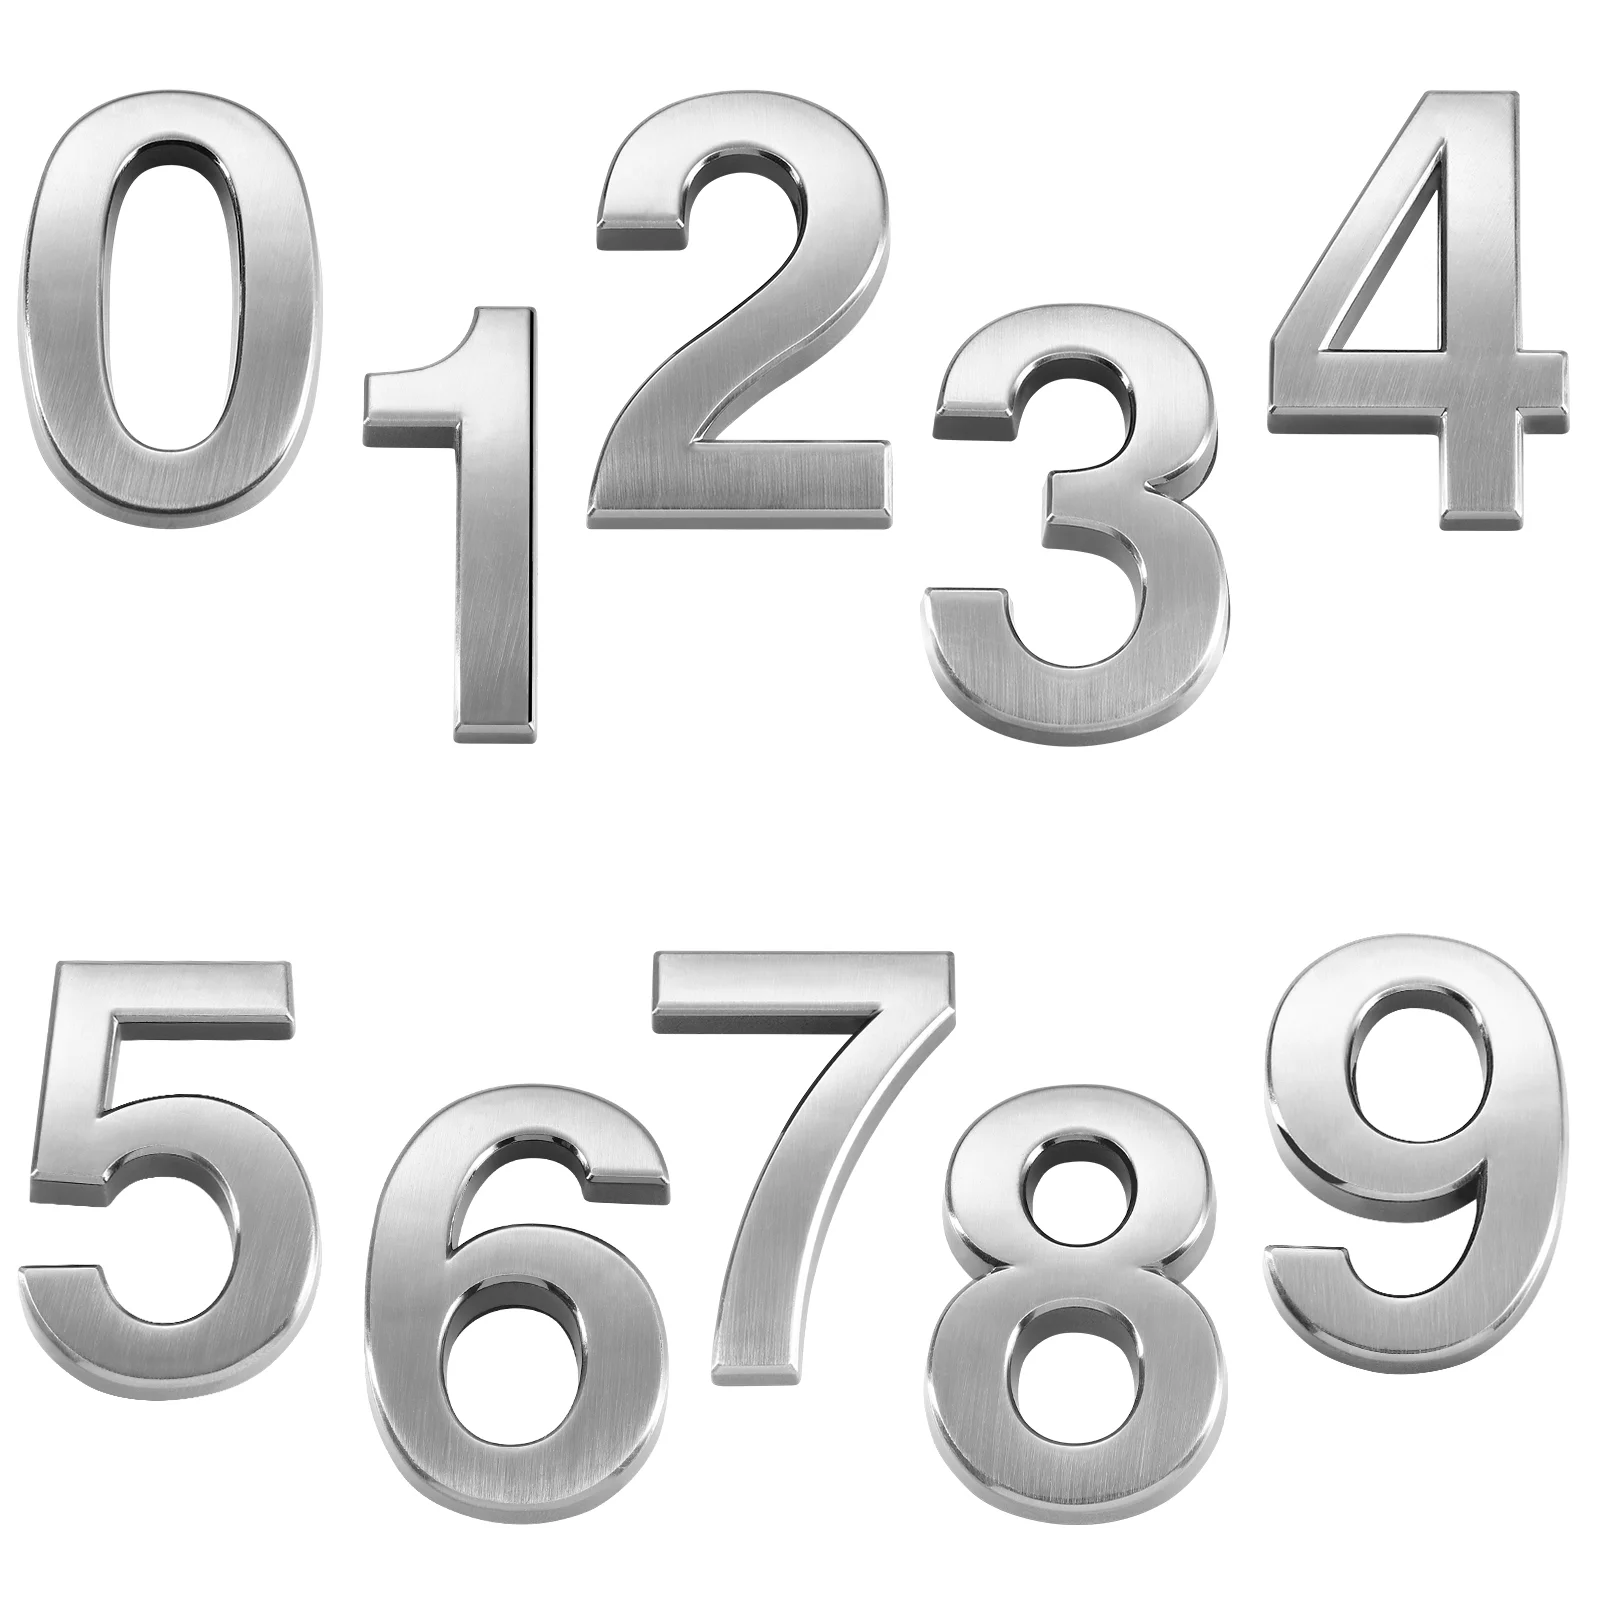 

VOSAREA 10pcs Modern Number Sign Stereoscopic 0-9 Numbers for KTV Home Mailbox Hotel Office